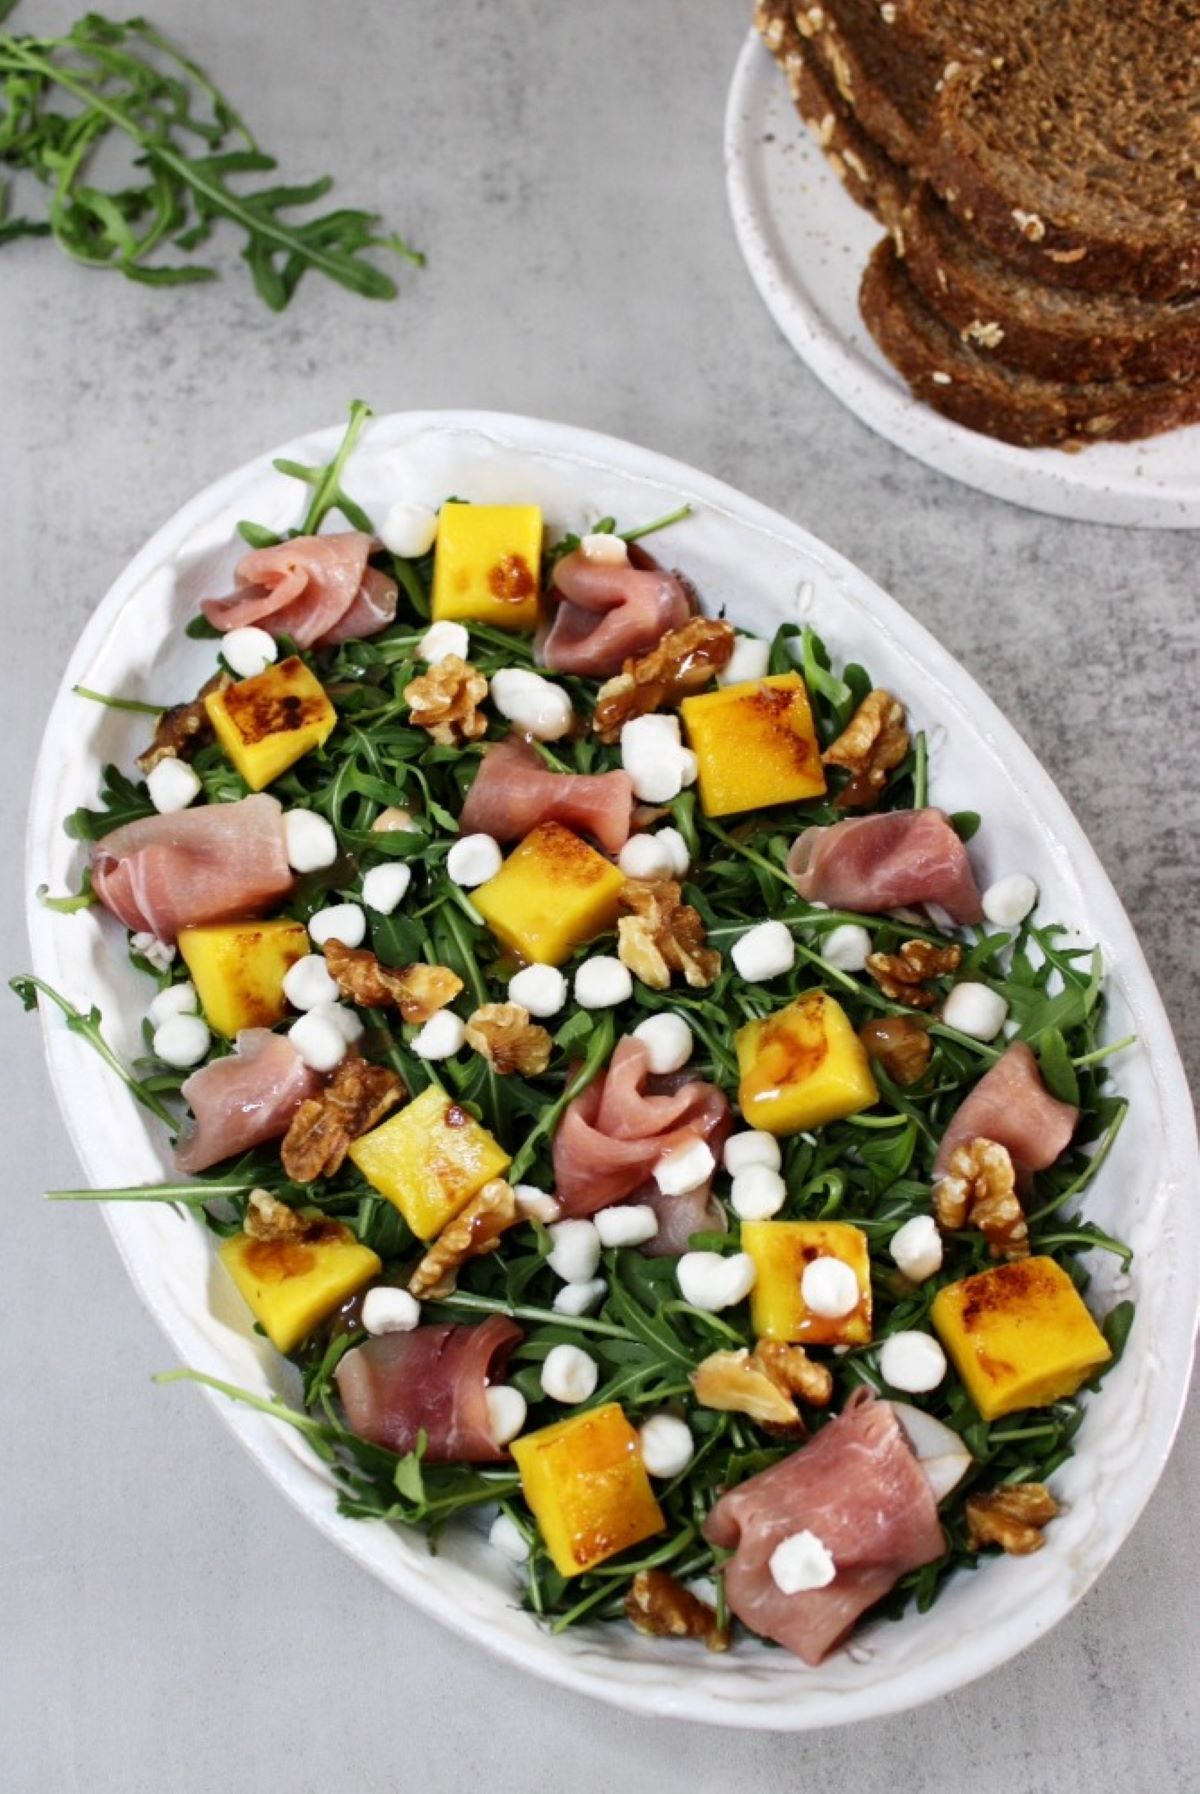 Salad with Mango and Goat Cheese